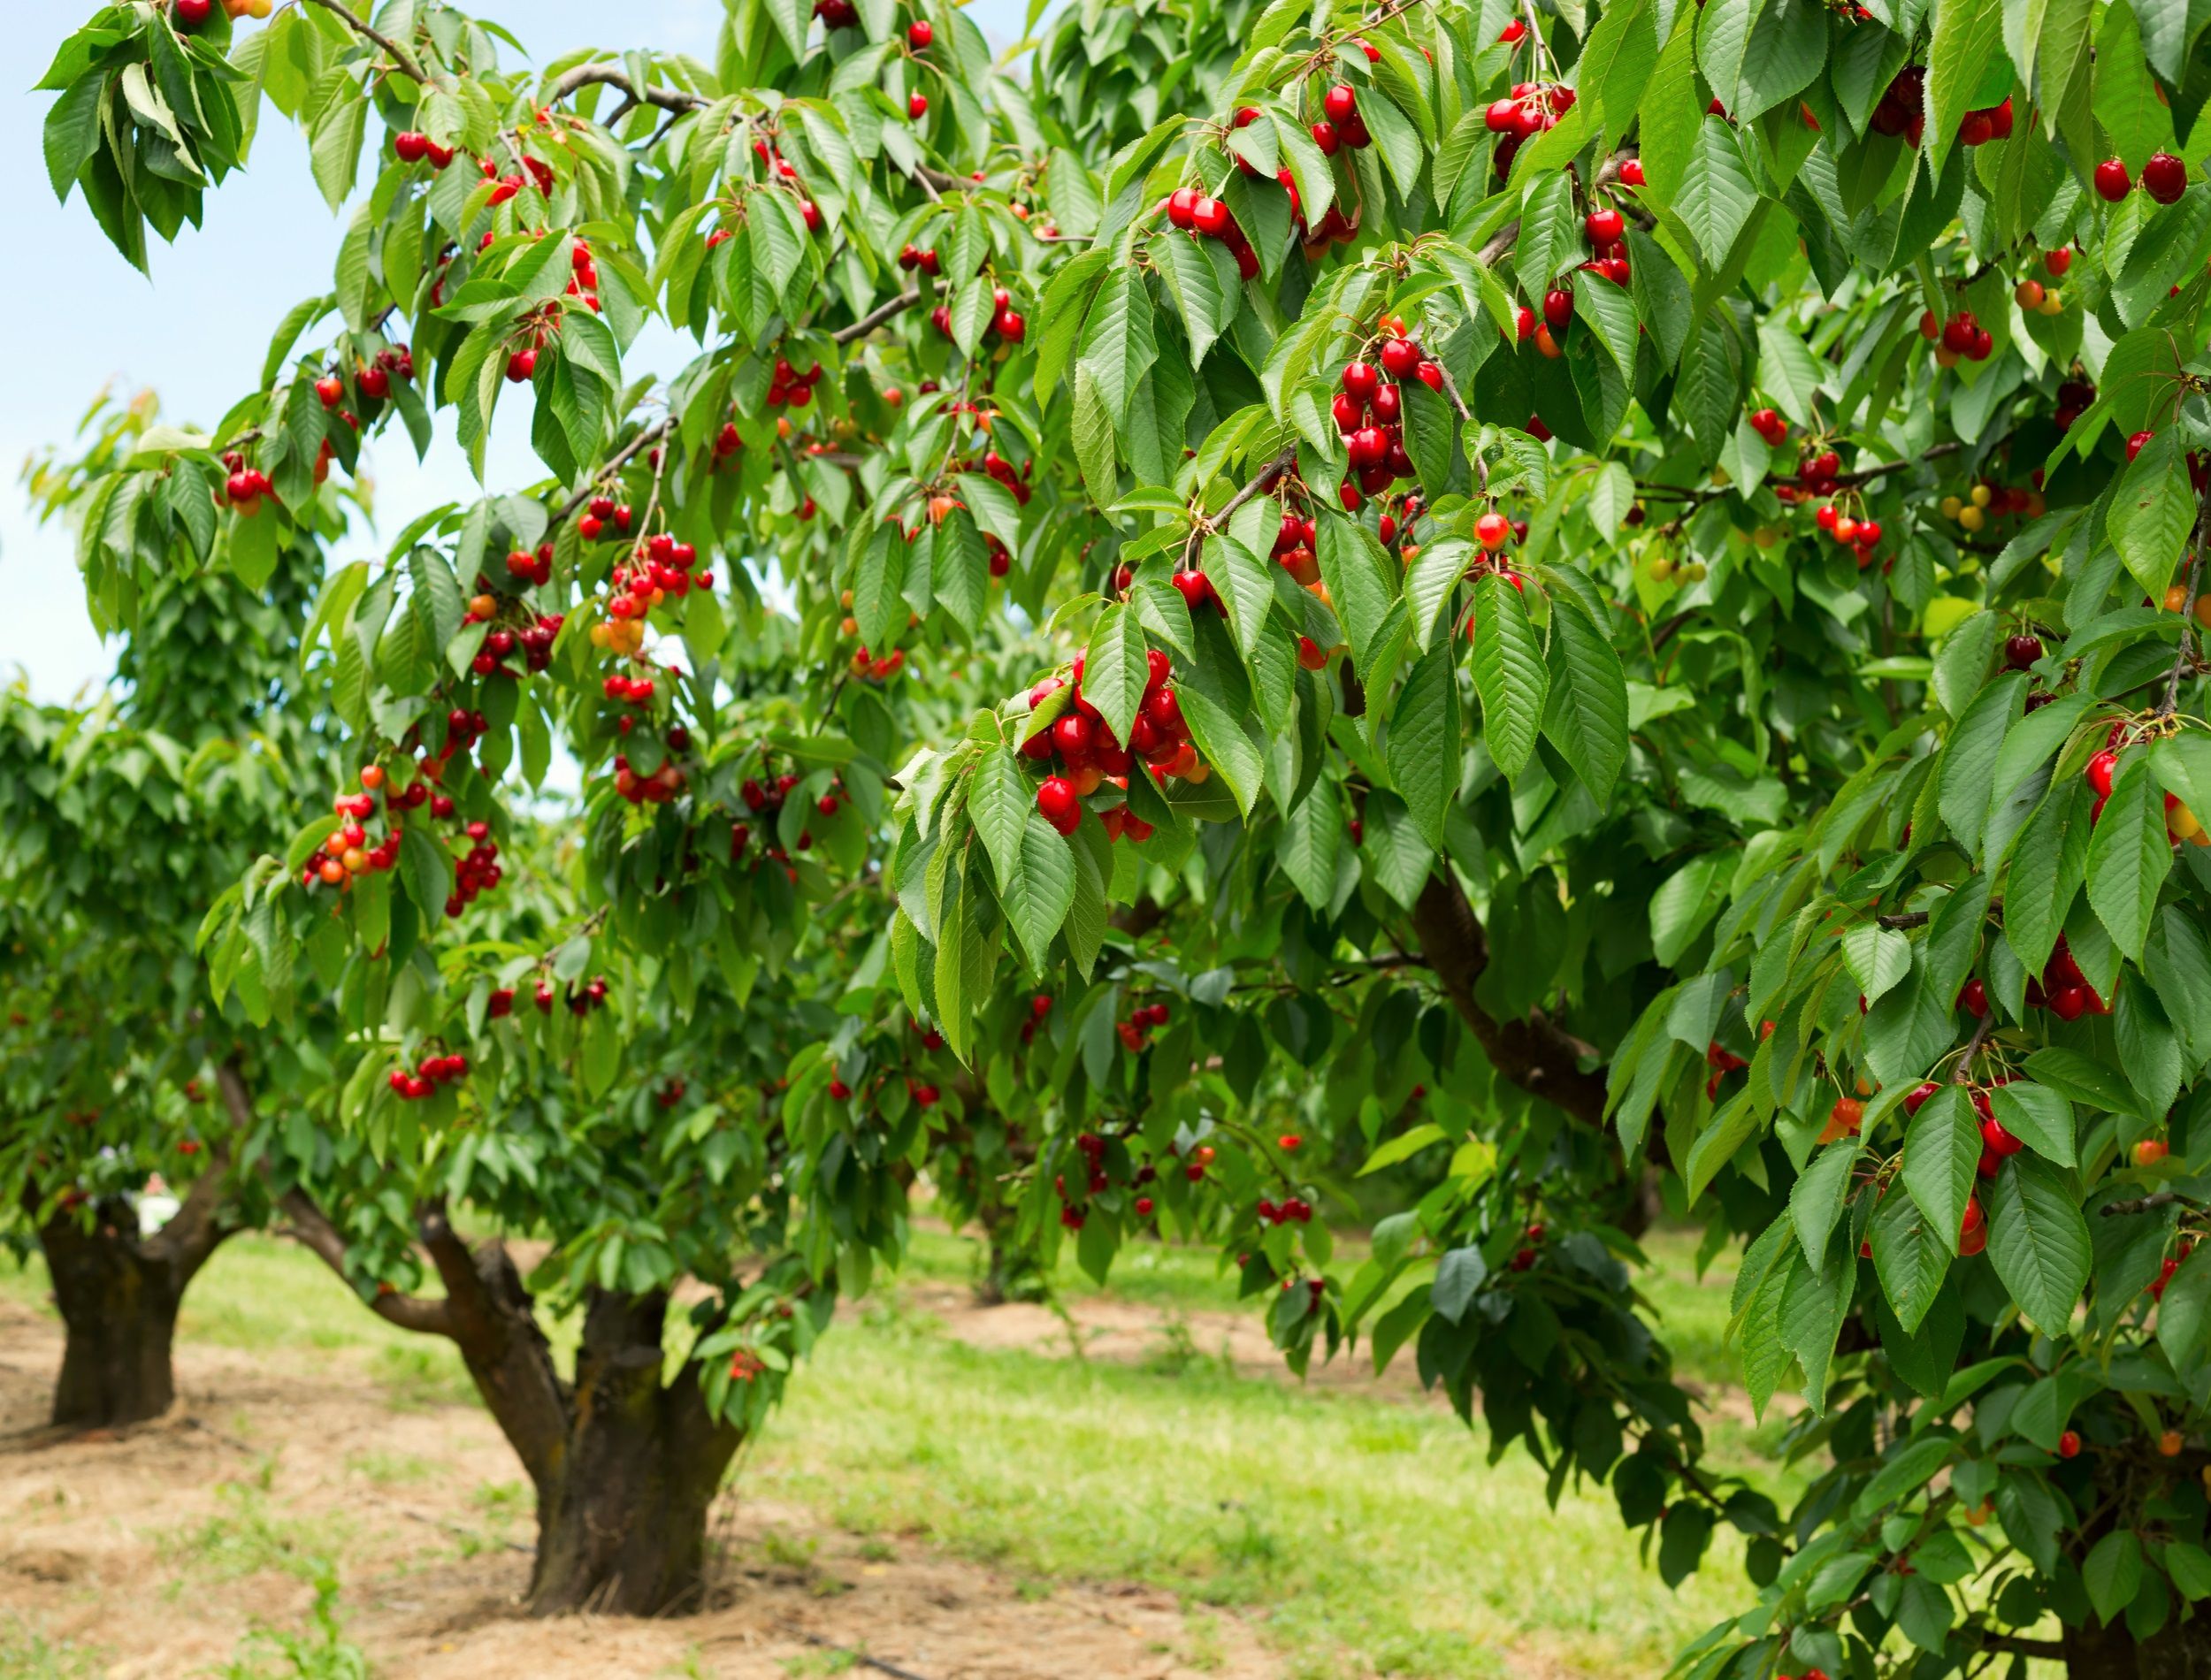 A photo of beautiful cherry trees with cherries in orchard.